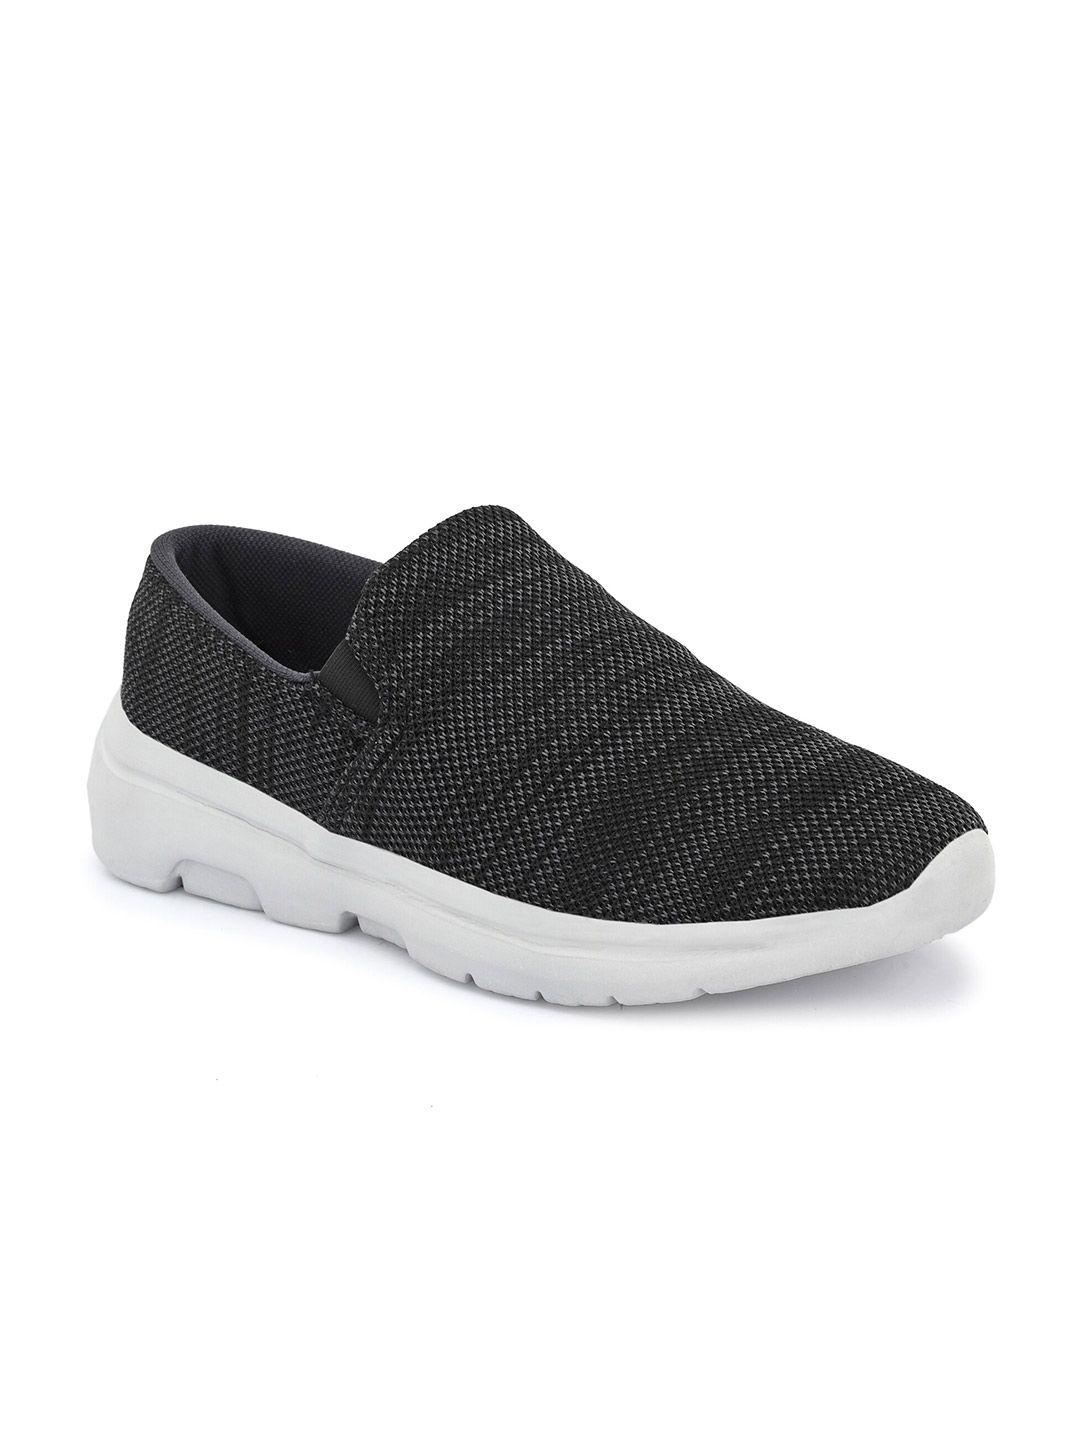 off limits men mesh mid top non-marking slip on walking shoes